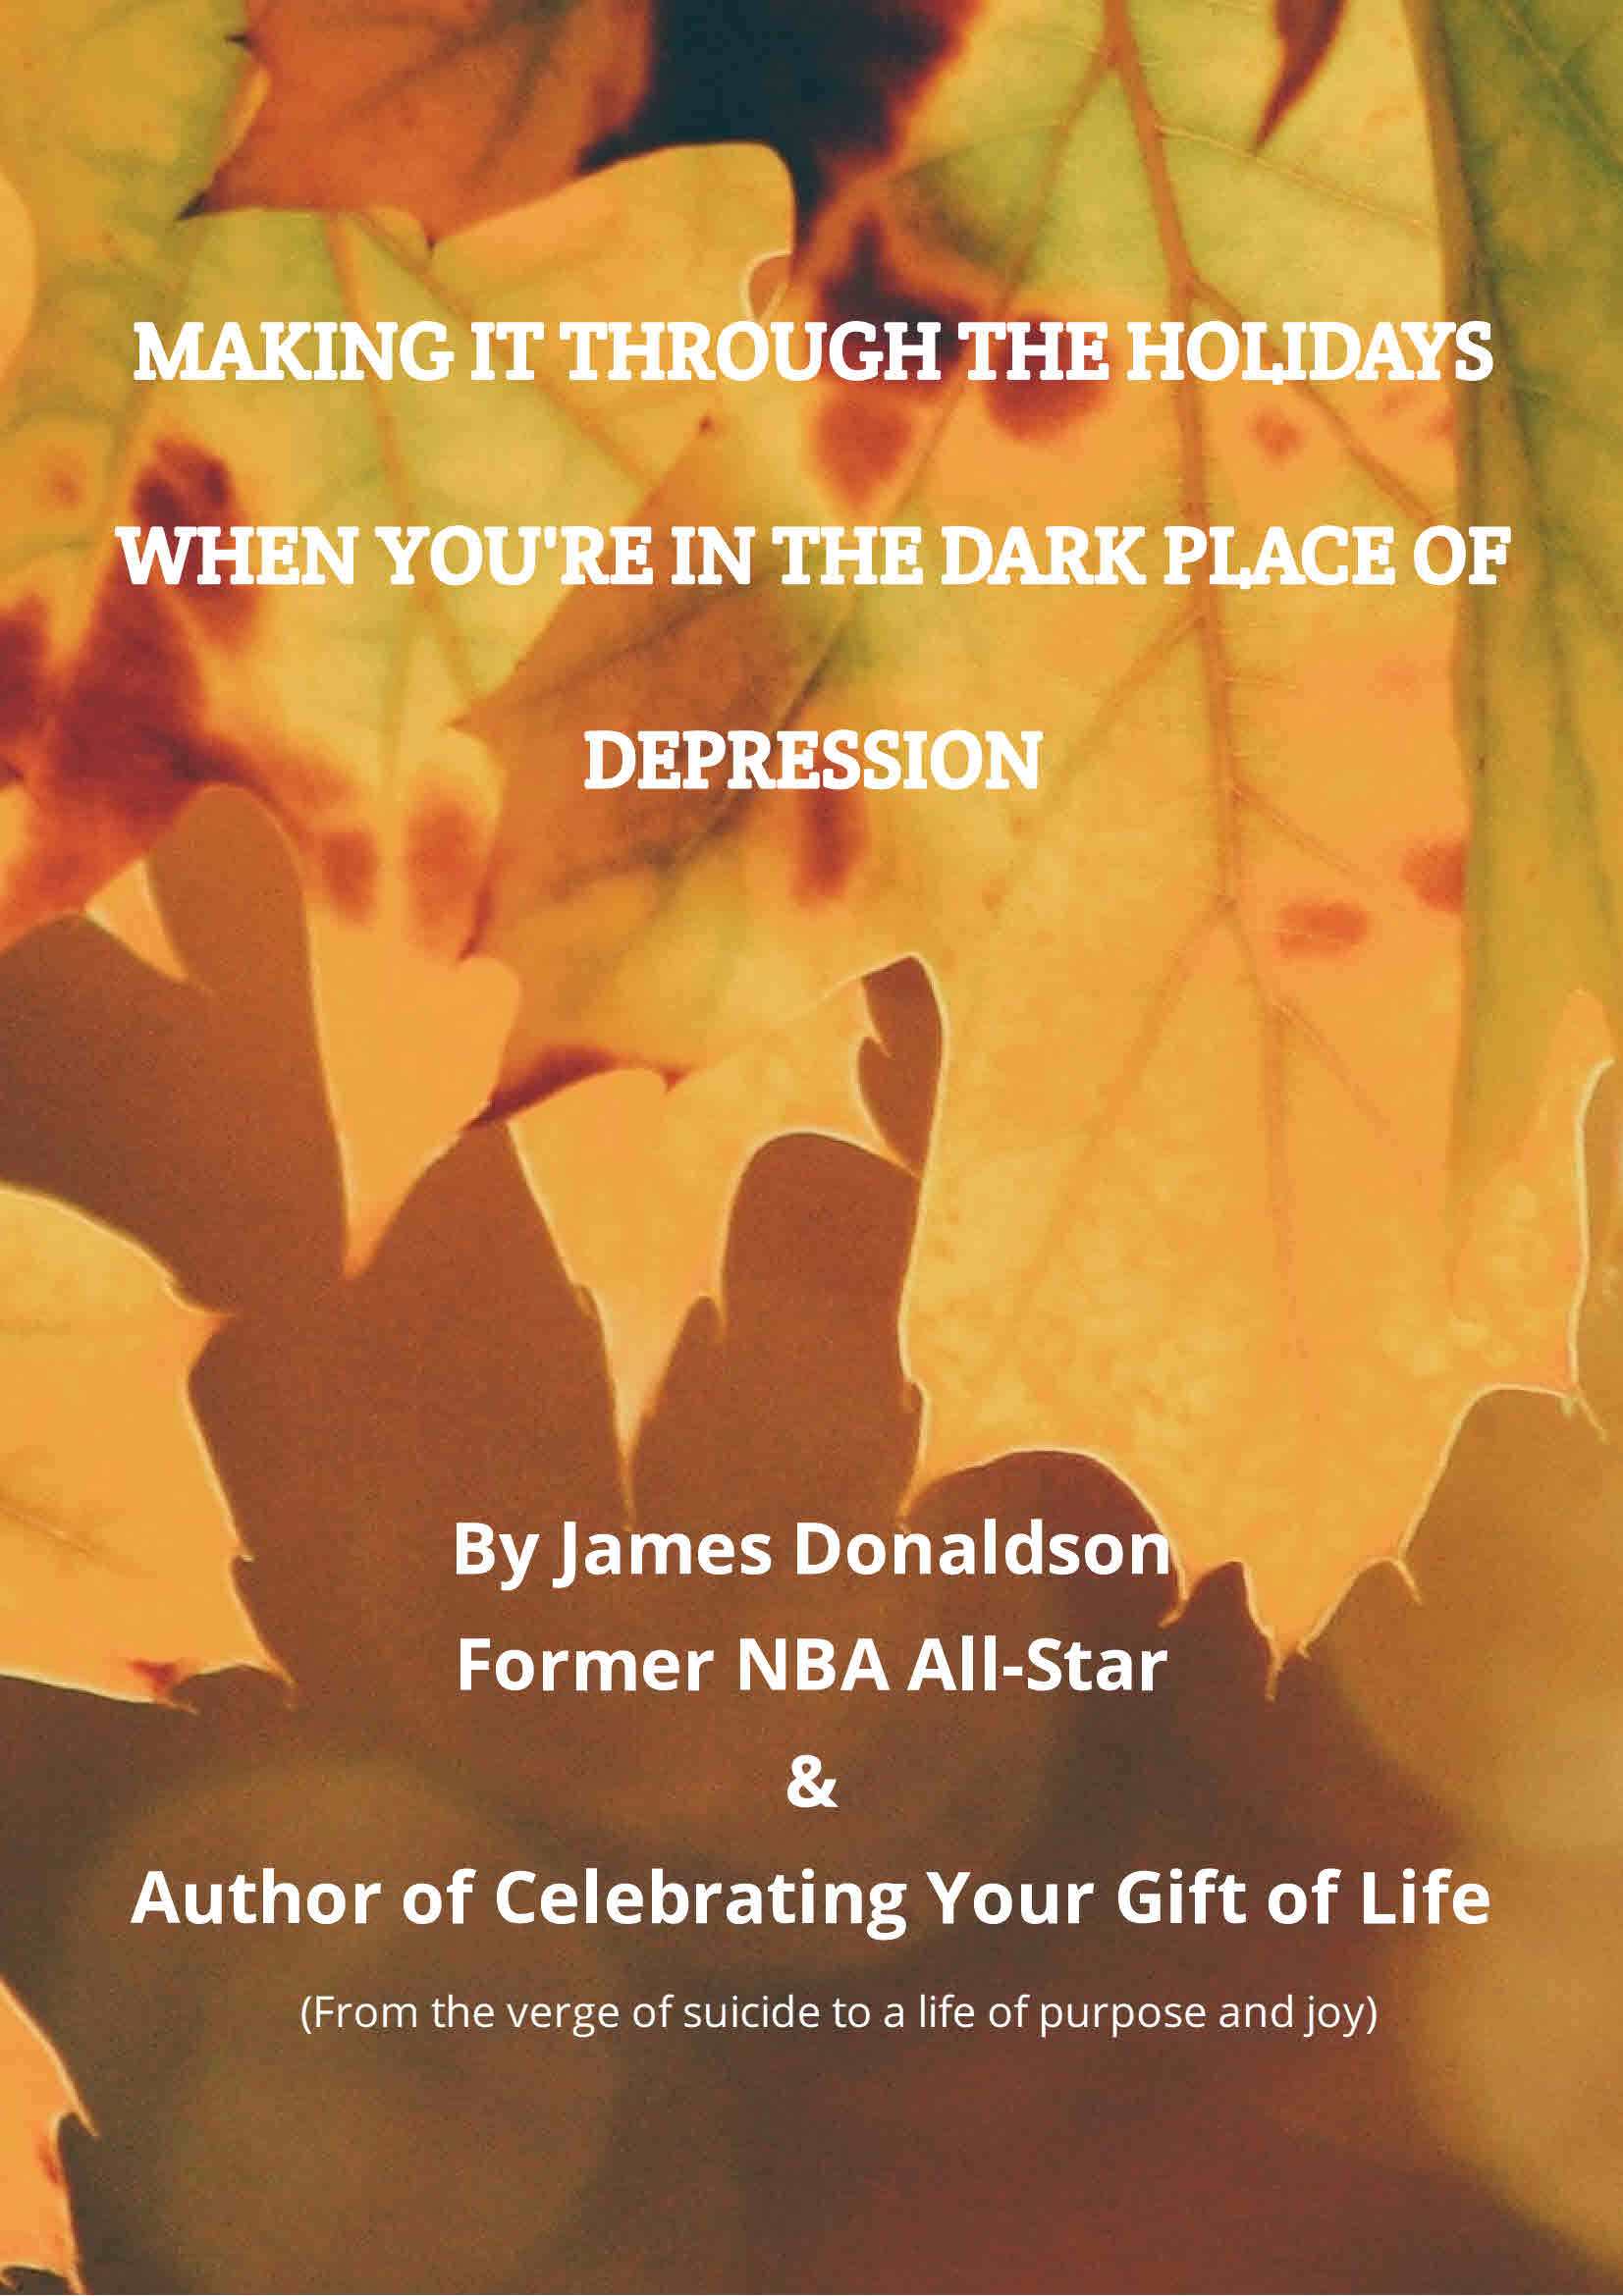 #JamesDonaldson On #MentalHealth – #MentalHealth And The #Holidays: Navigating #Suicide During This Time Of Year (Short Video)